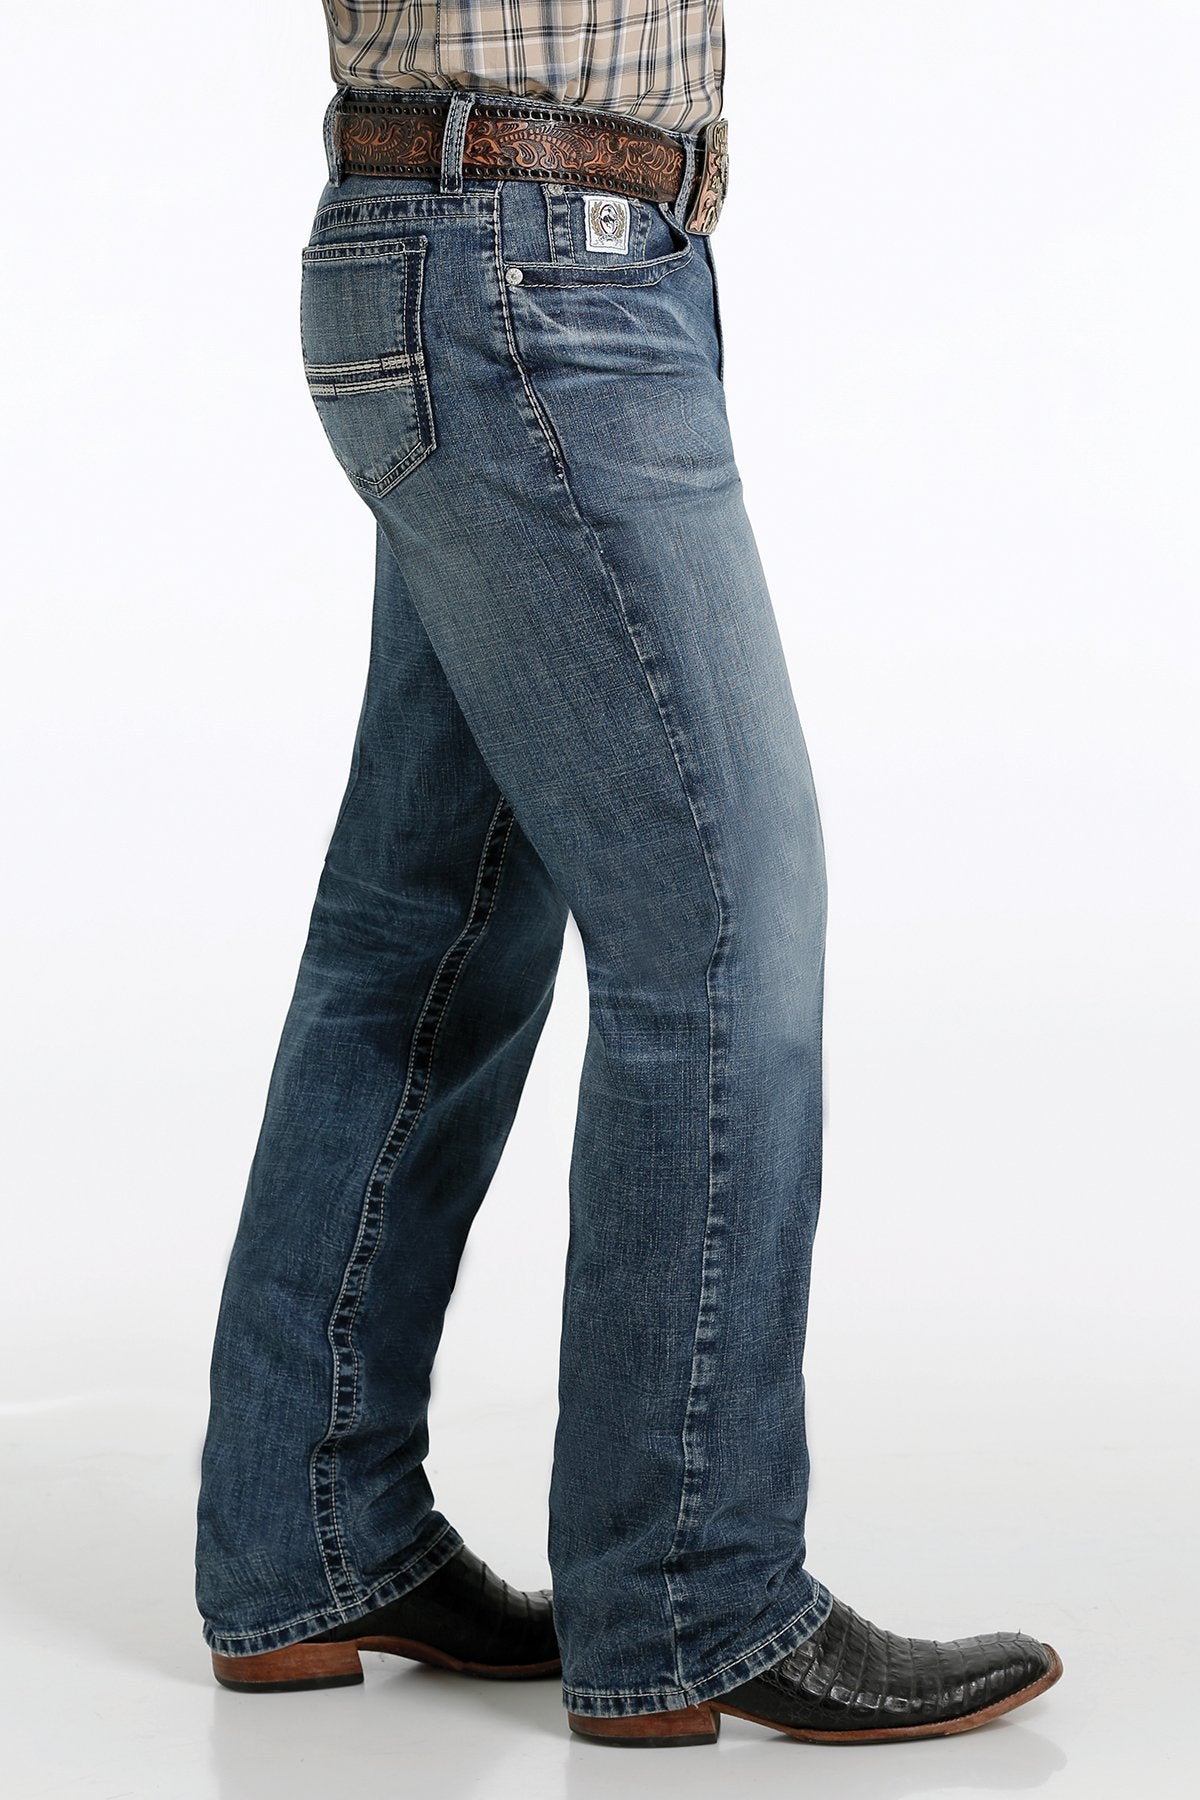 Cinch White Label Relaxed Jean